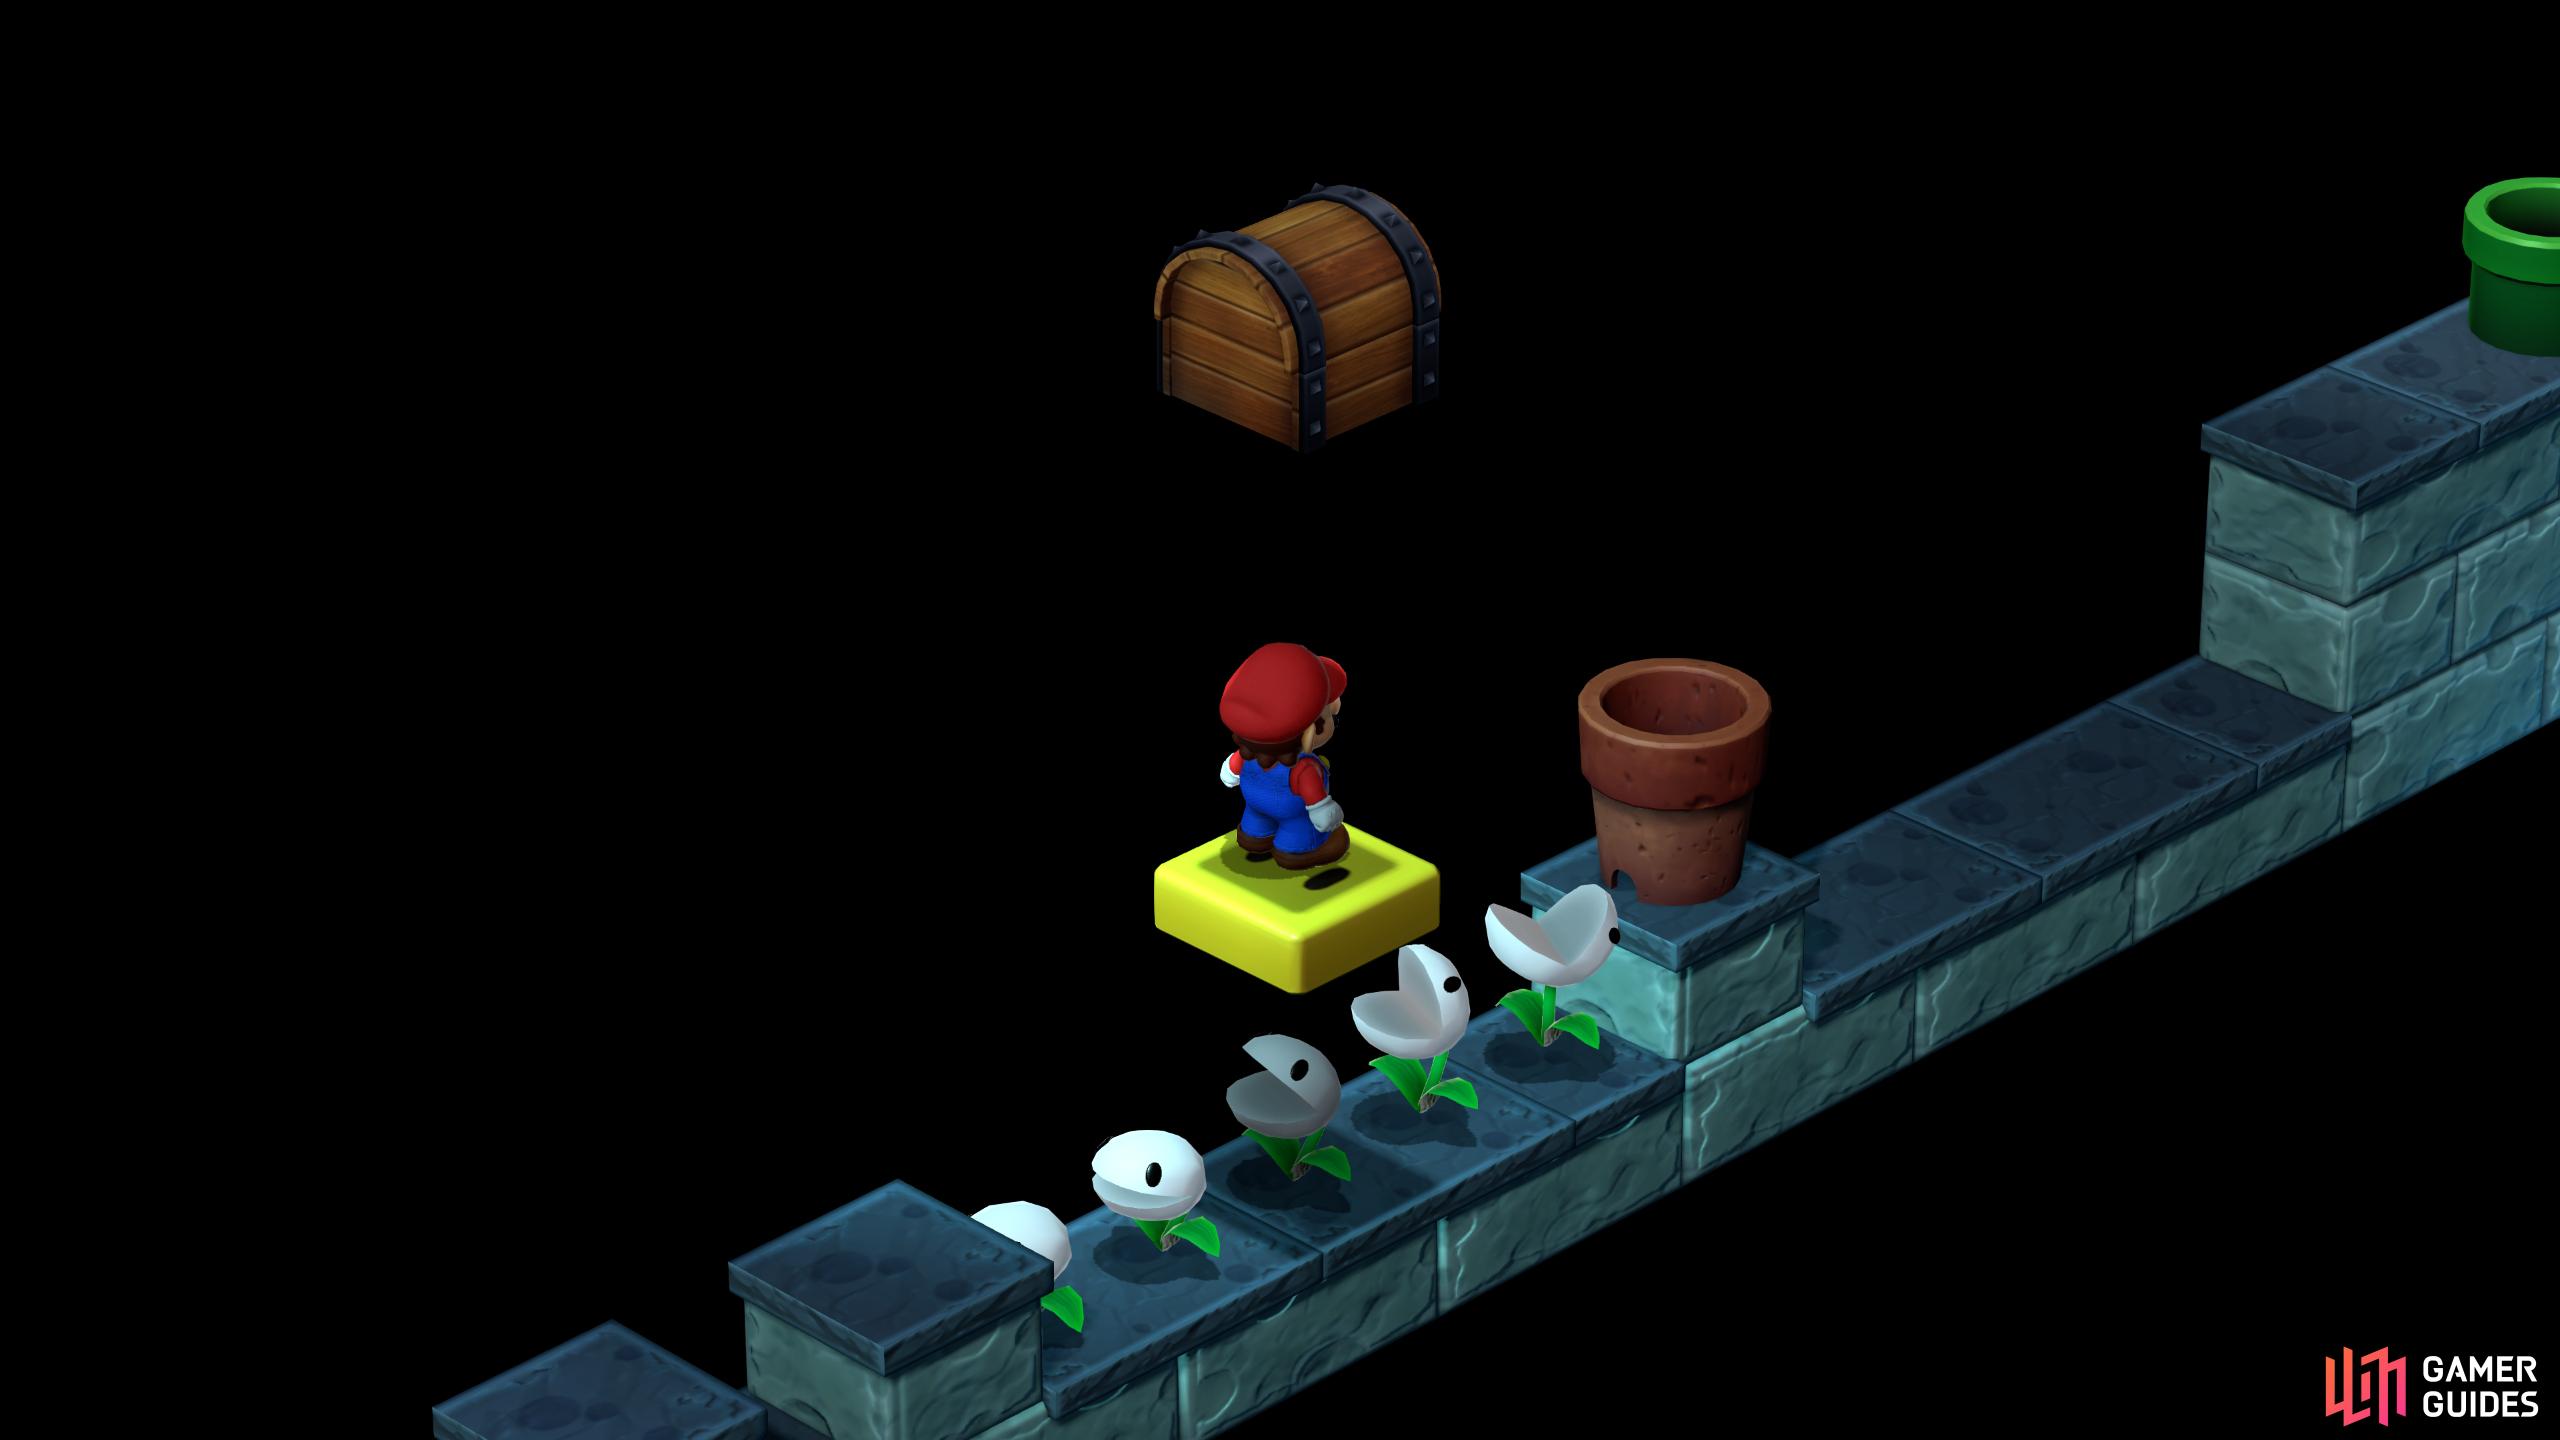 A bit further, jump on the yellow block and jump at the chest multiple times for 20 coins.